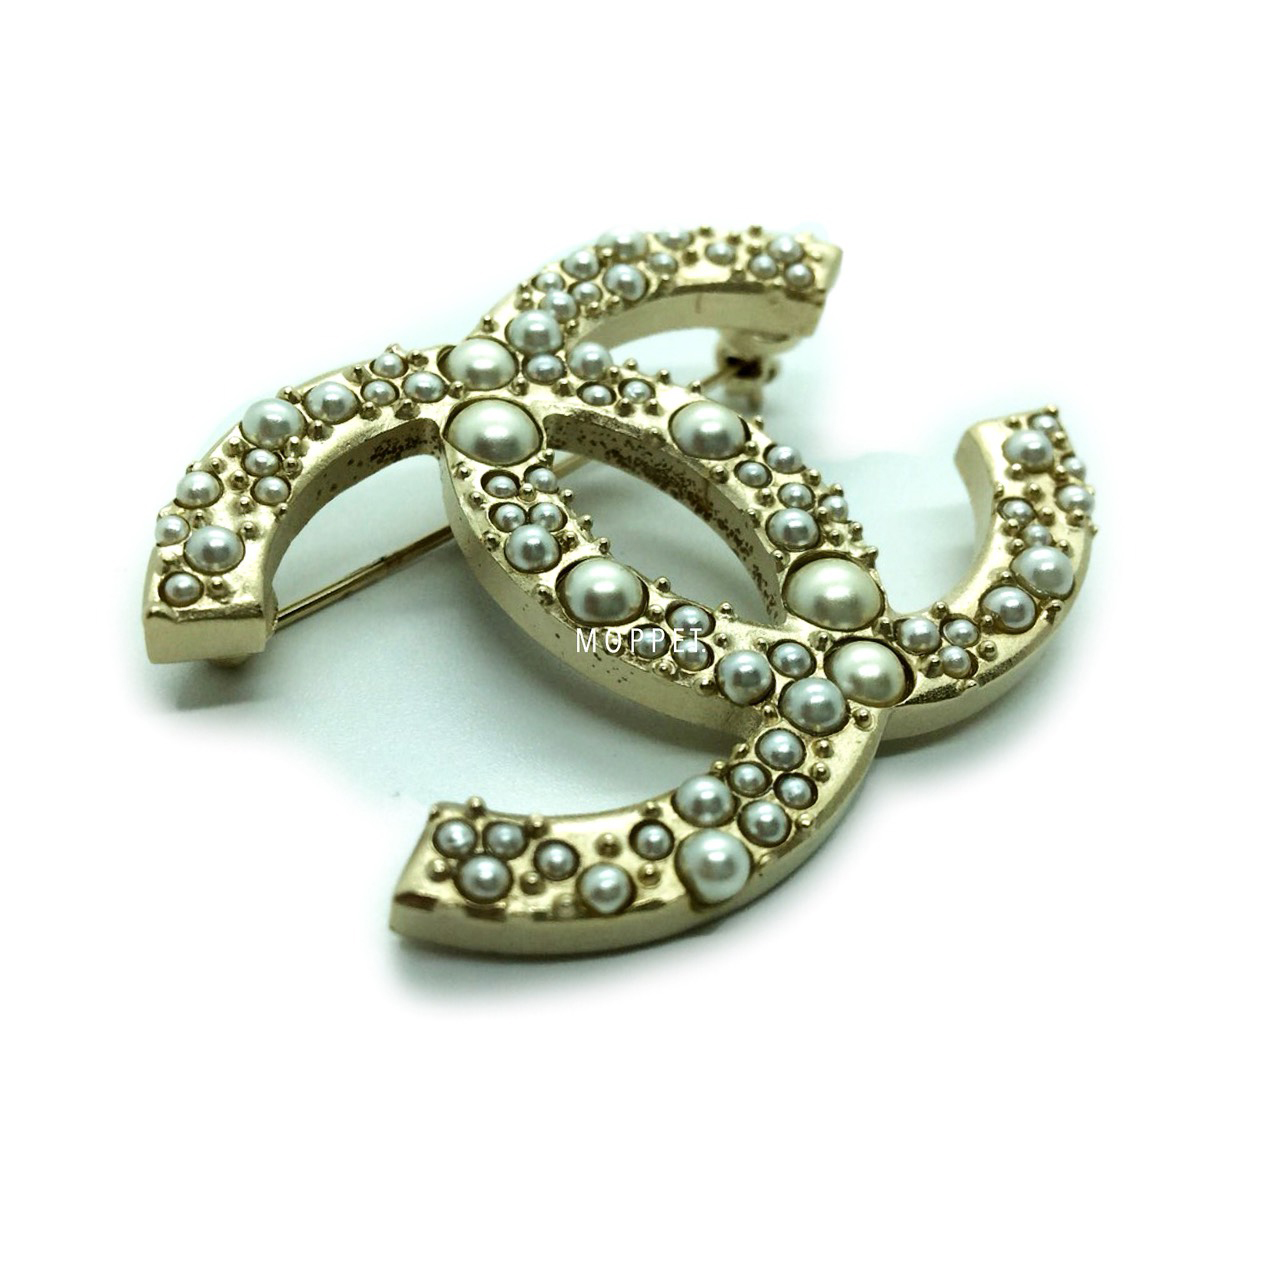 New Chanel CC Brooch 5 CM in Pearly GHW